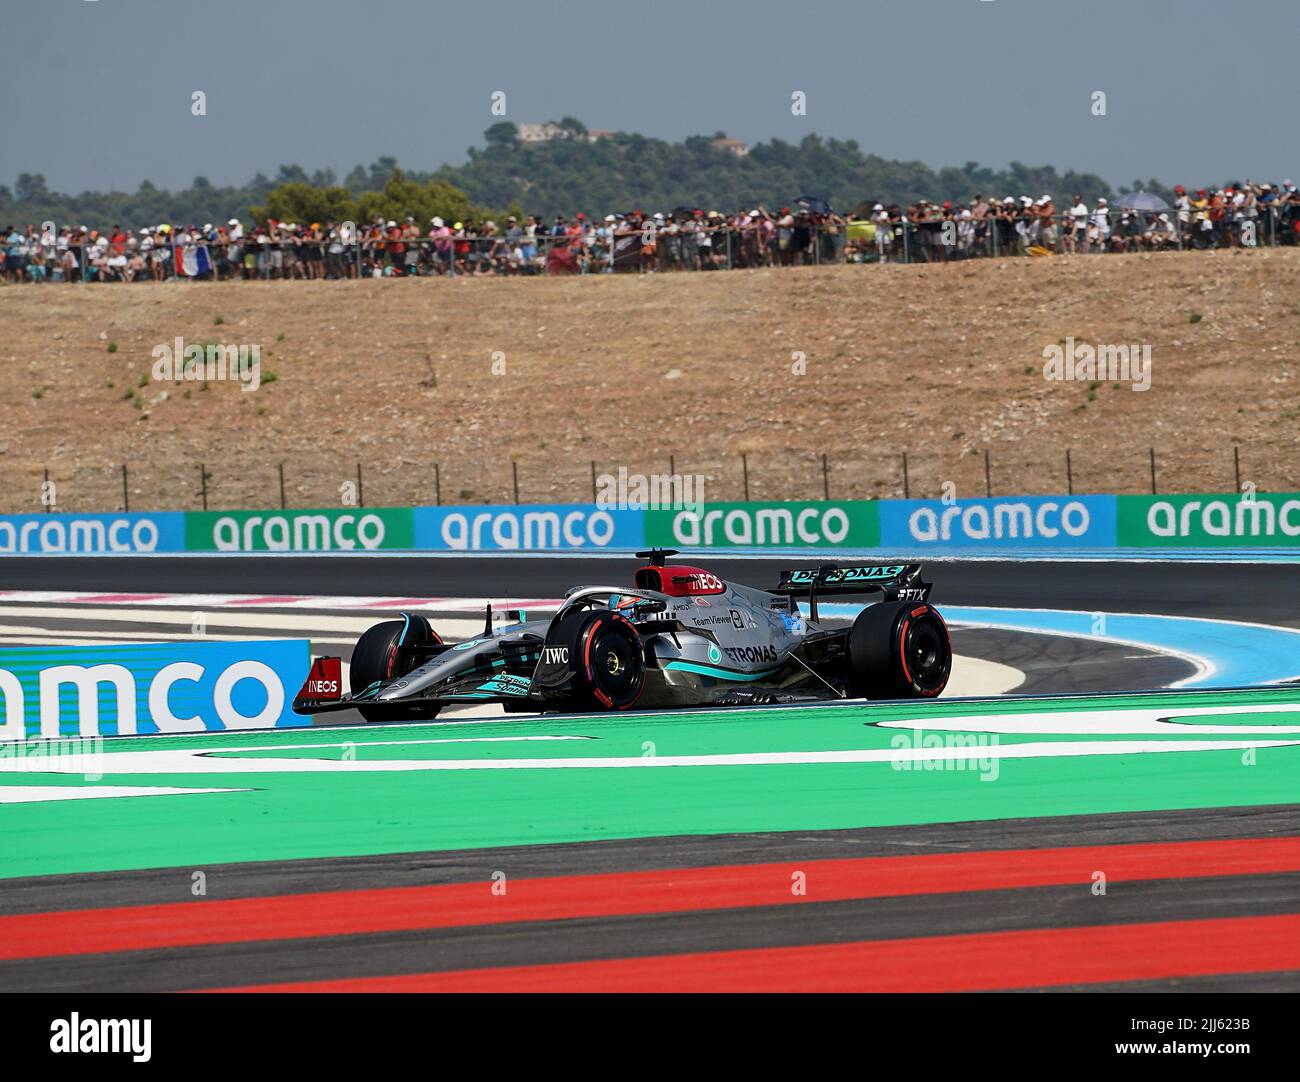 Le Castellet, France. 23rd July, 2022. Motorsport: Formula 1 World Championship, ahead of the French Grand Prix, qualifying: George Russell from Great Britain of Team Mercedes is on track. Credit: Hasan Bratic/dpa/Alamy Live News Stock Photo